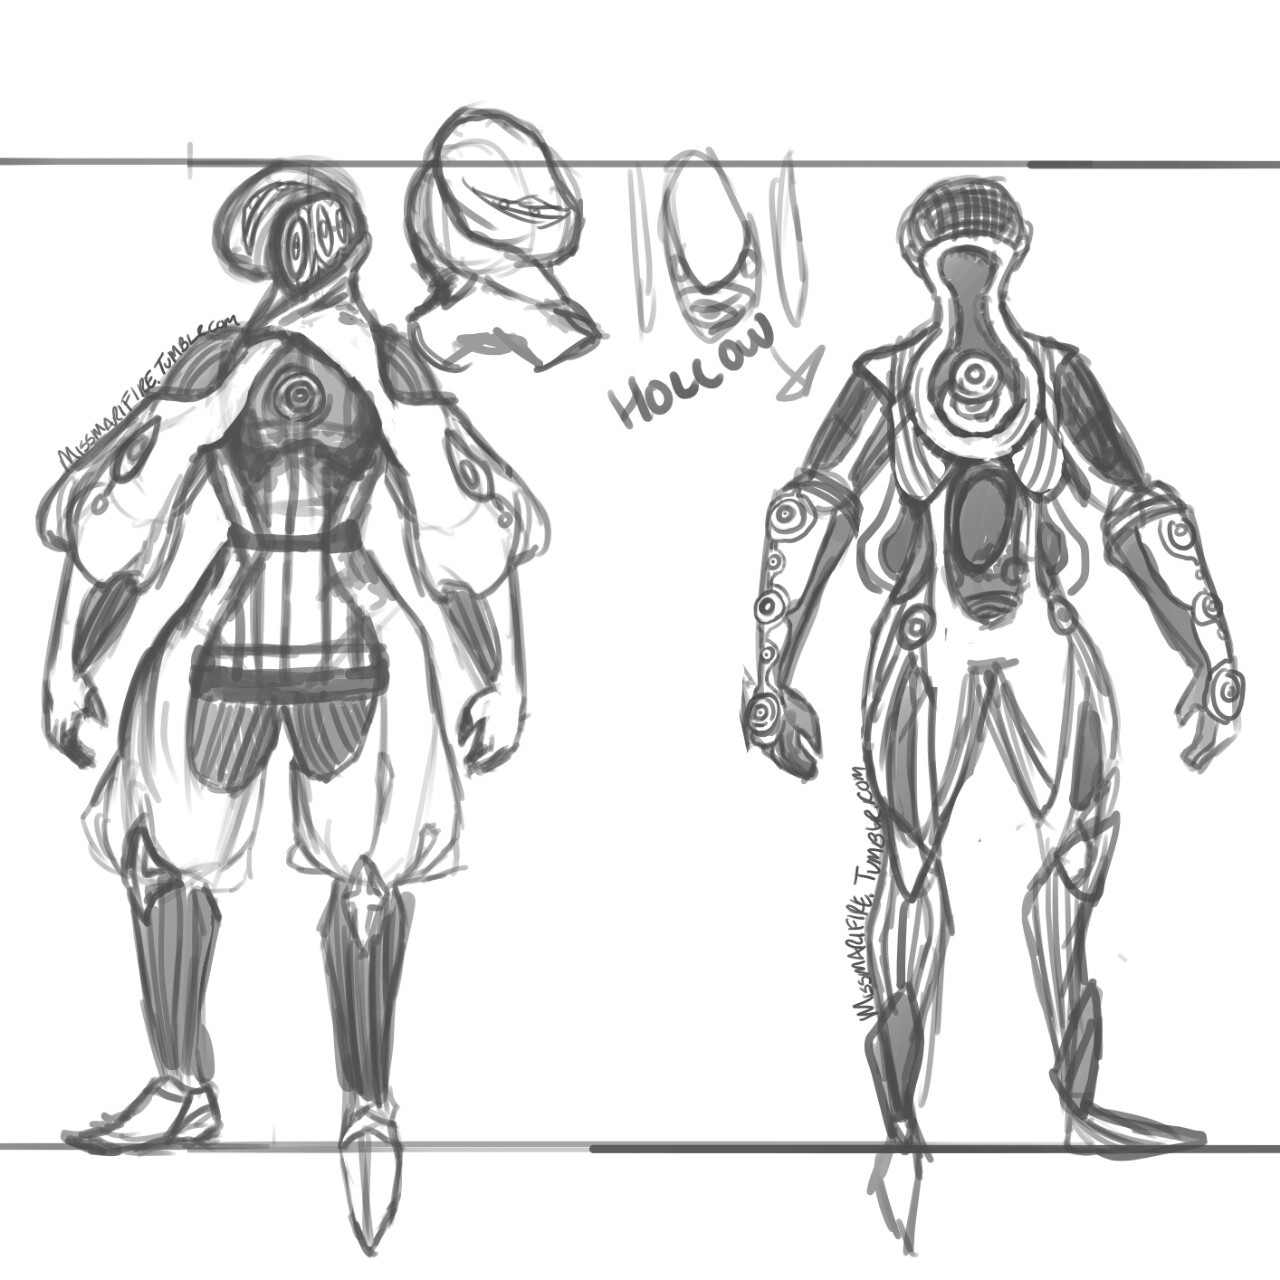 Tempo- The Bard/Music Frame (With Art!) - Fan Concepts - Warframe Forums